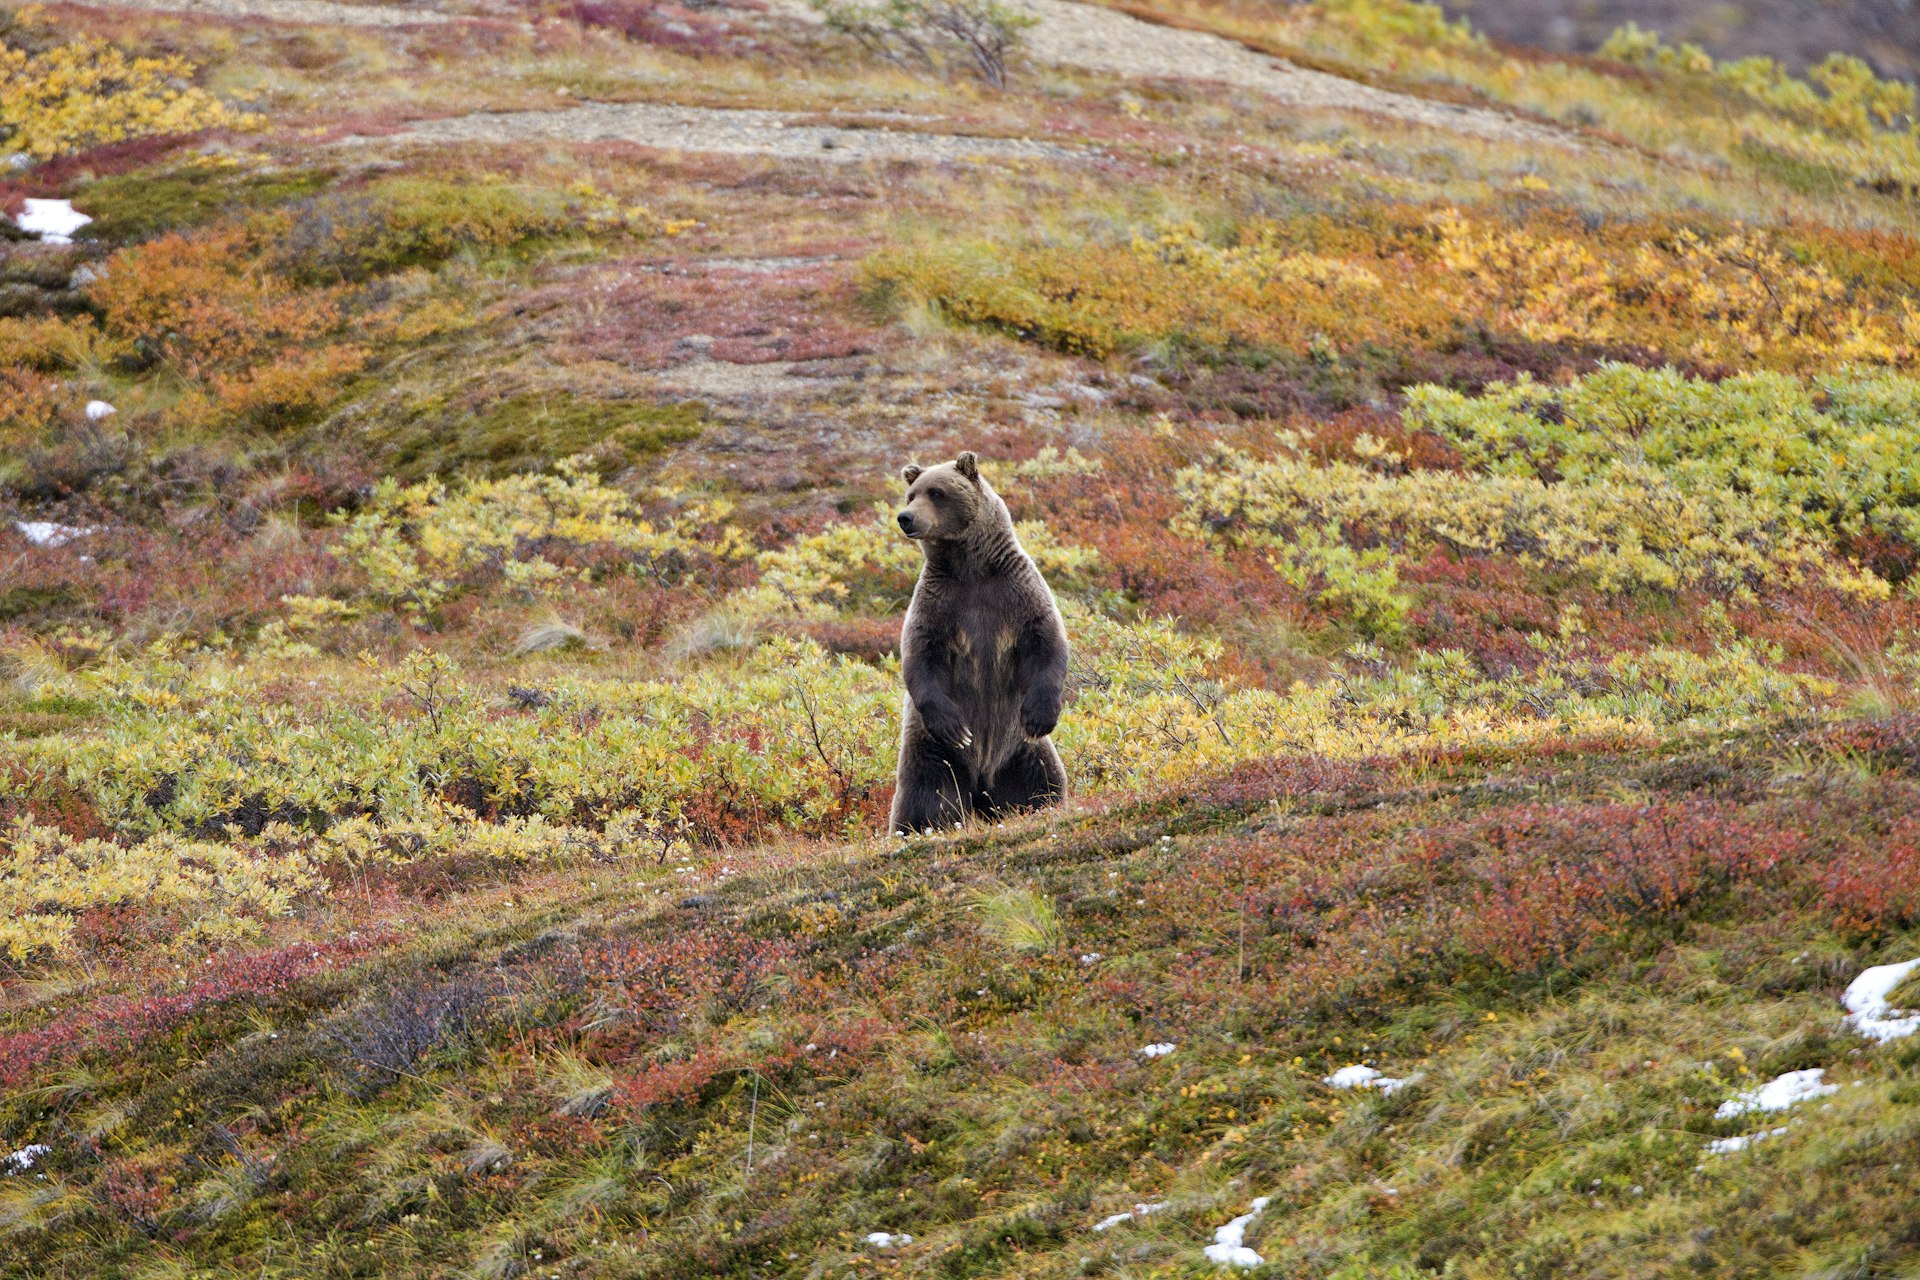 Grizzly bears are the pre-eminent predators in Denali National Park